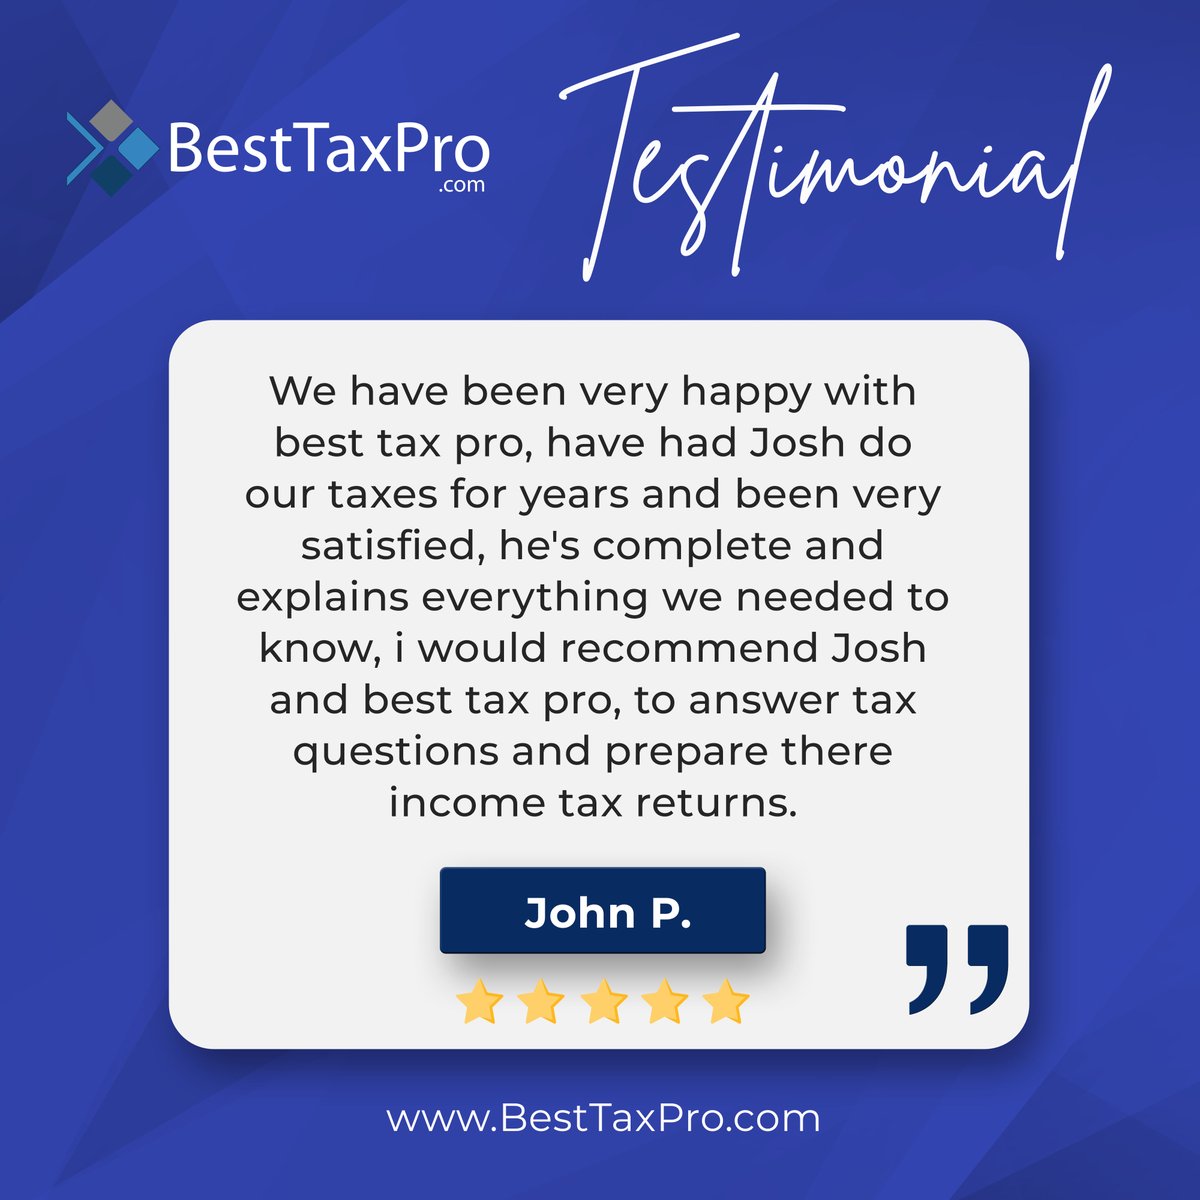 Unlock the Tax Assistance You Deserve! Reach out via call, DM, or book an appointment to experience personalized tax help tailored just for you, like John.

#DeserveTaxHelp #ExpertGuidance #TaxAssistance #FinancialSupport #BookNow